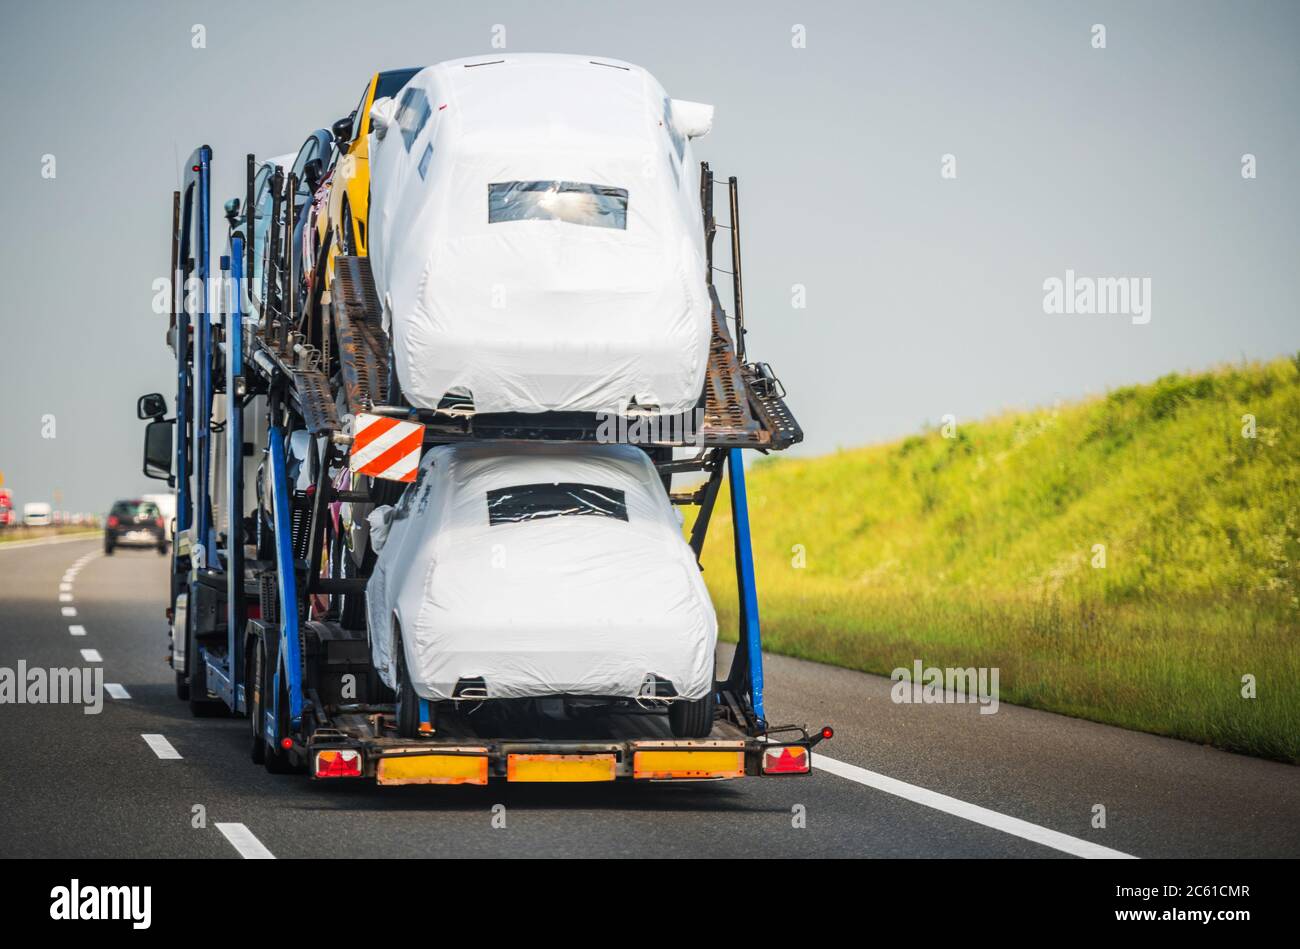 Car Carrier Trailer Full of Vehicles Driving Down the Highway. Car Hauler Semi Truck Vehicle Transportation. Stock Photo